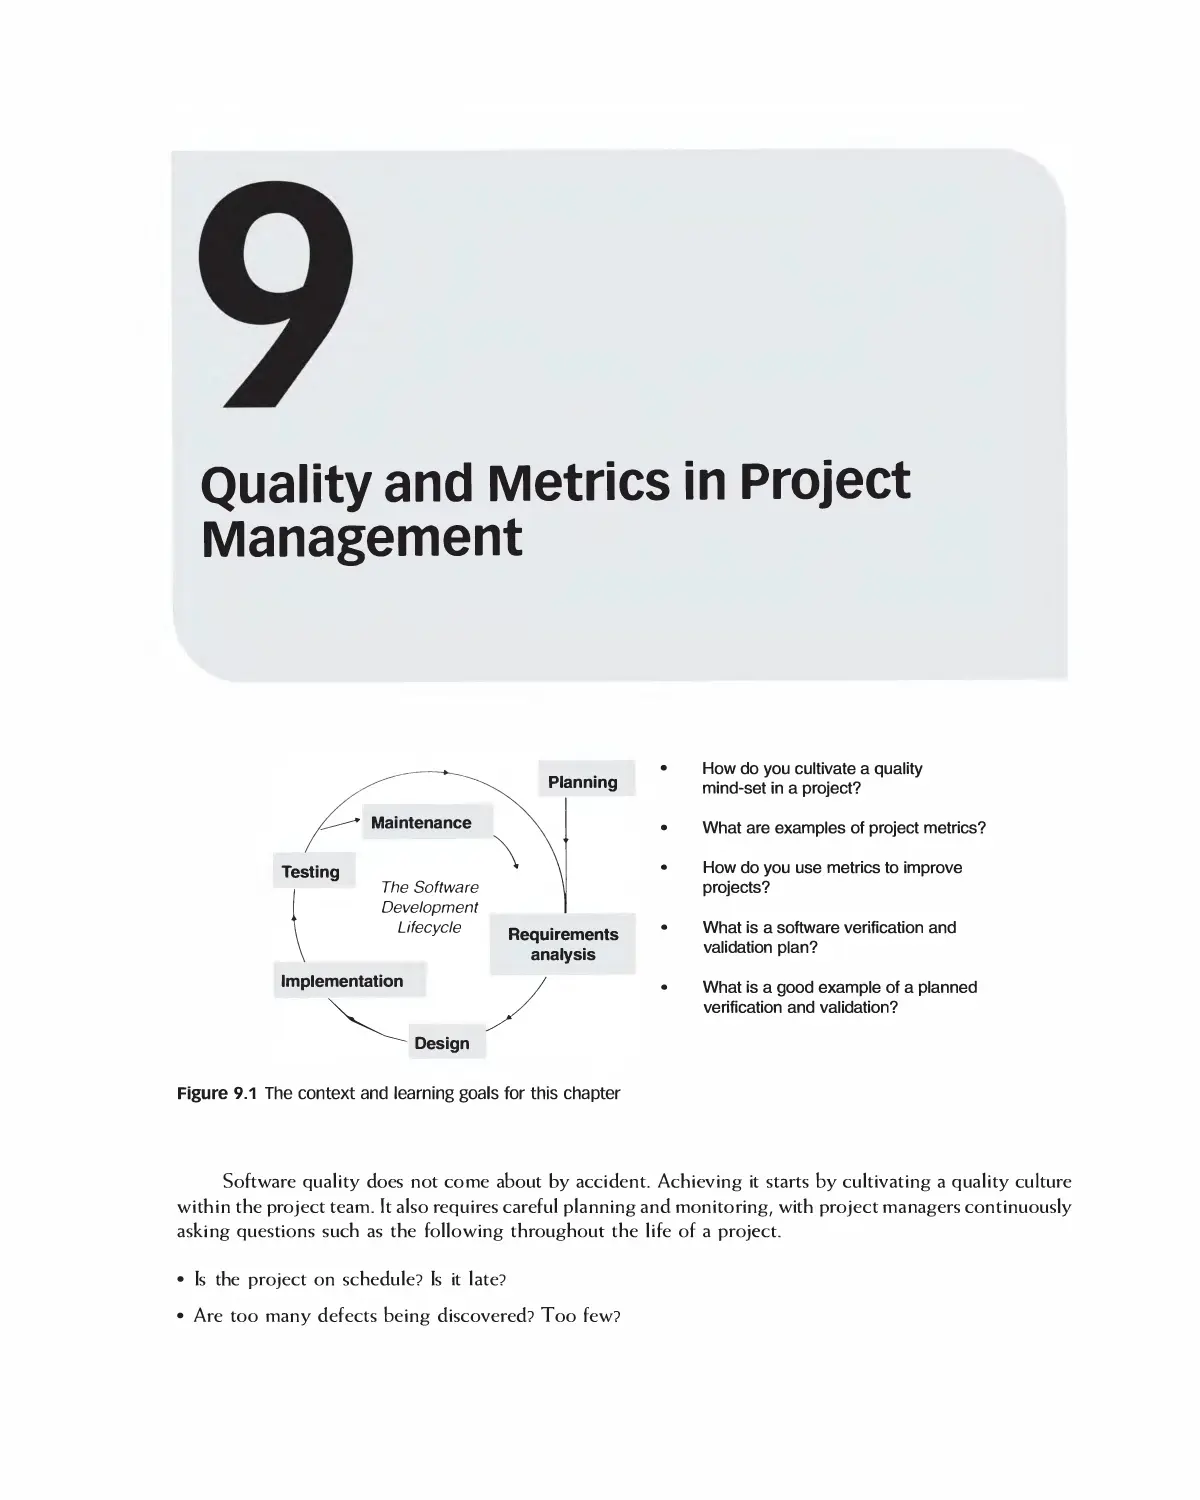 Chapter 9: Quality and Metrics in Project Management